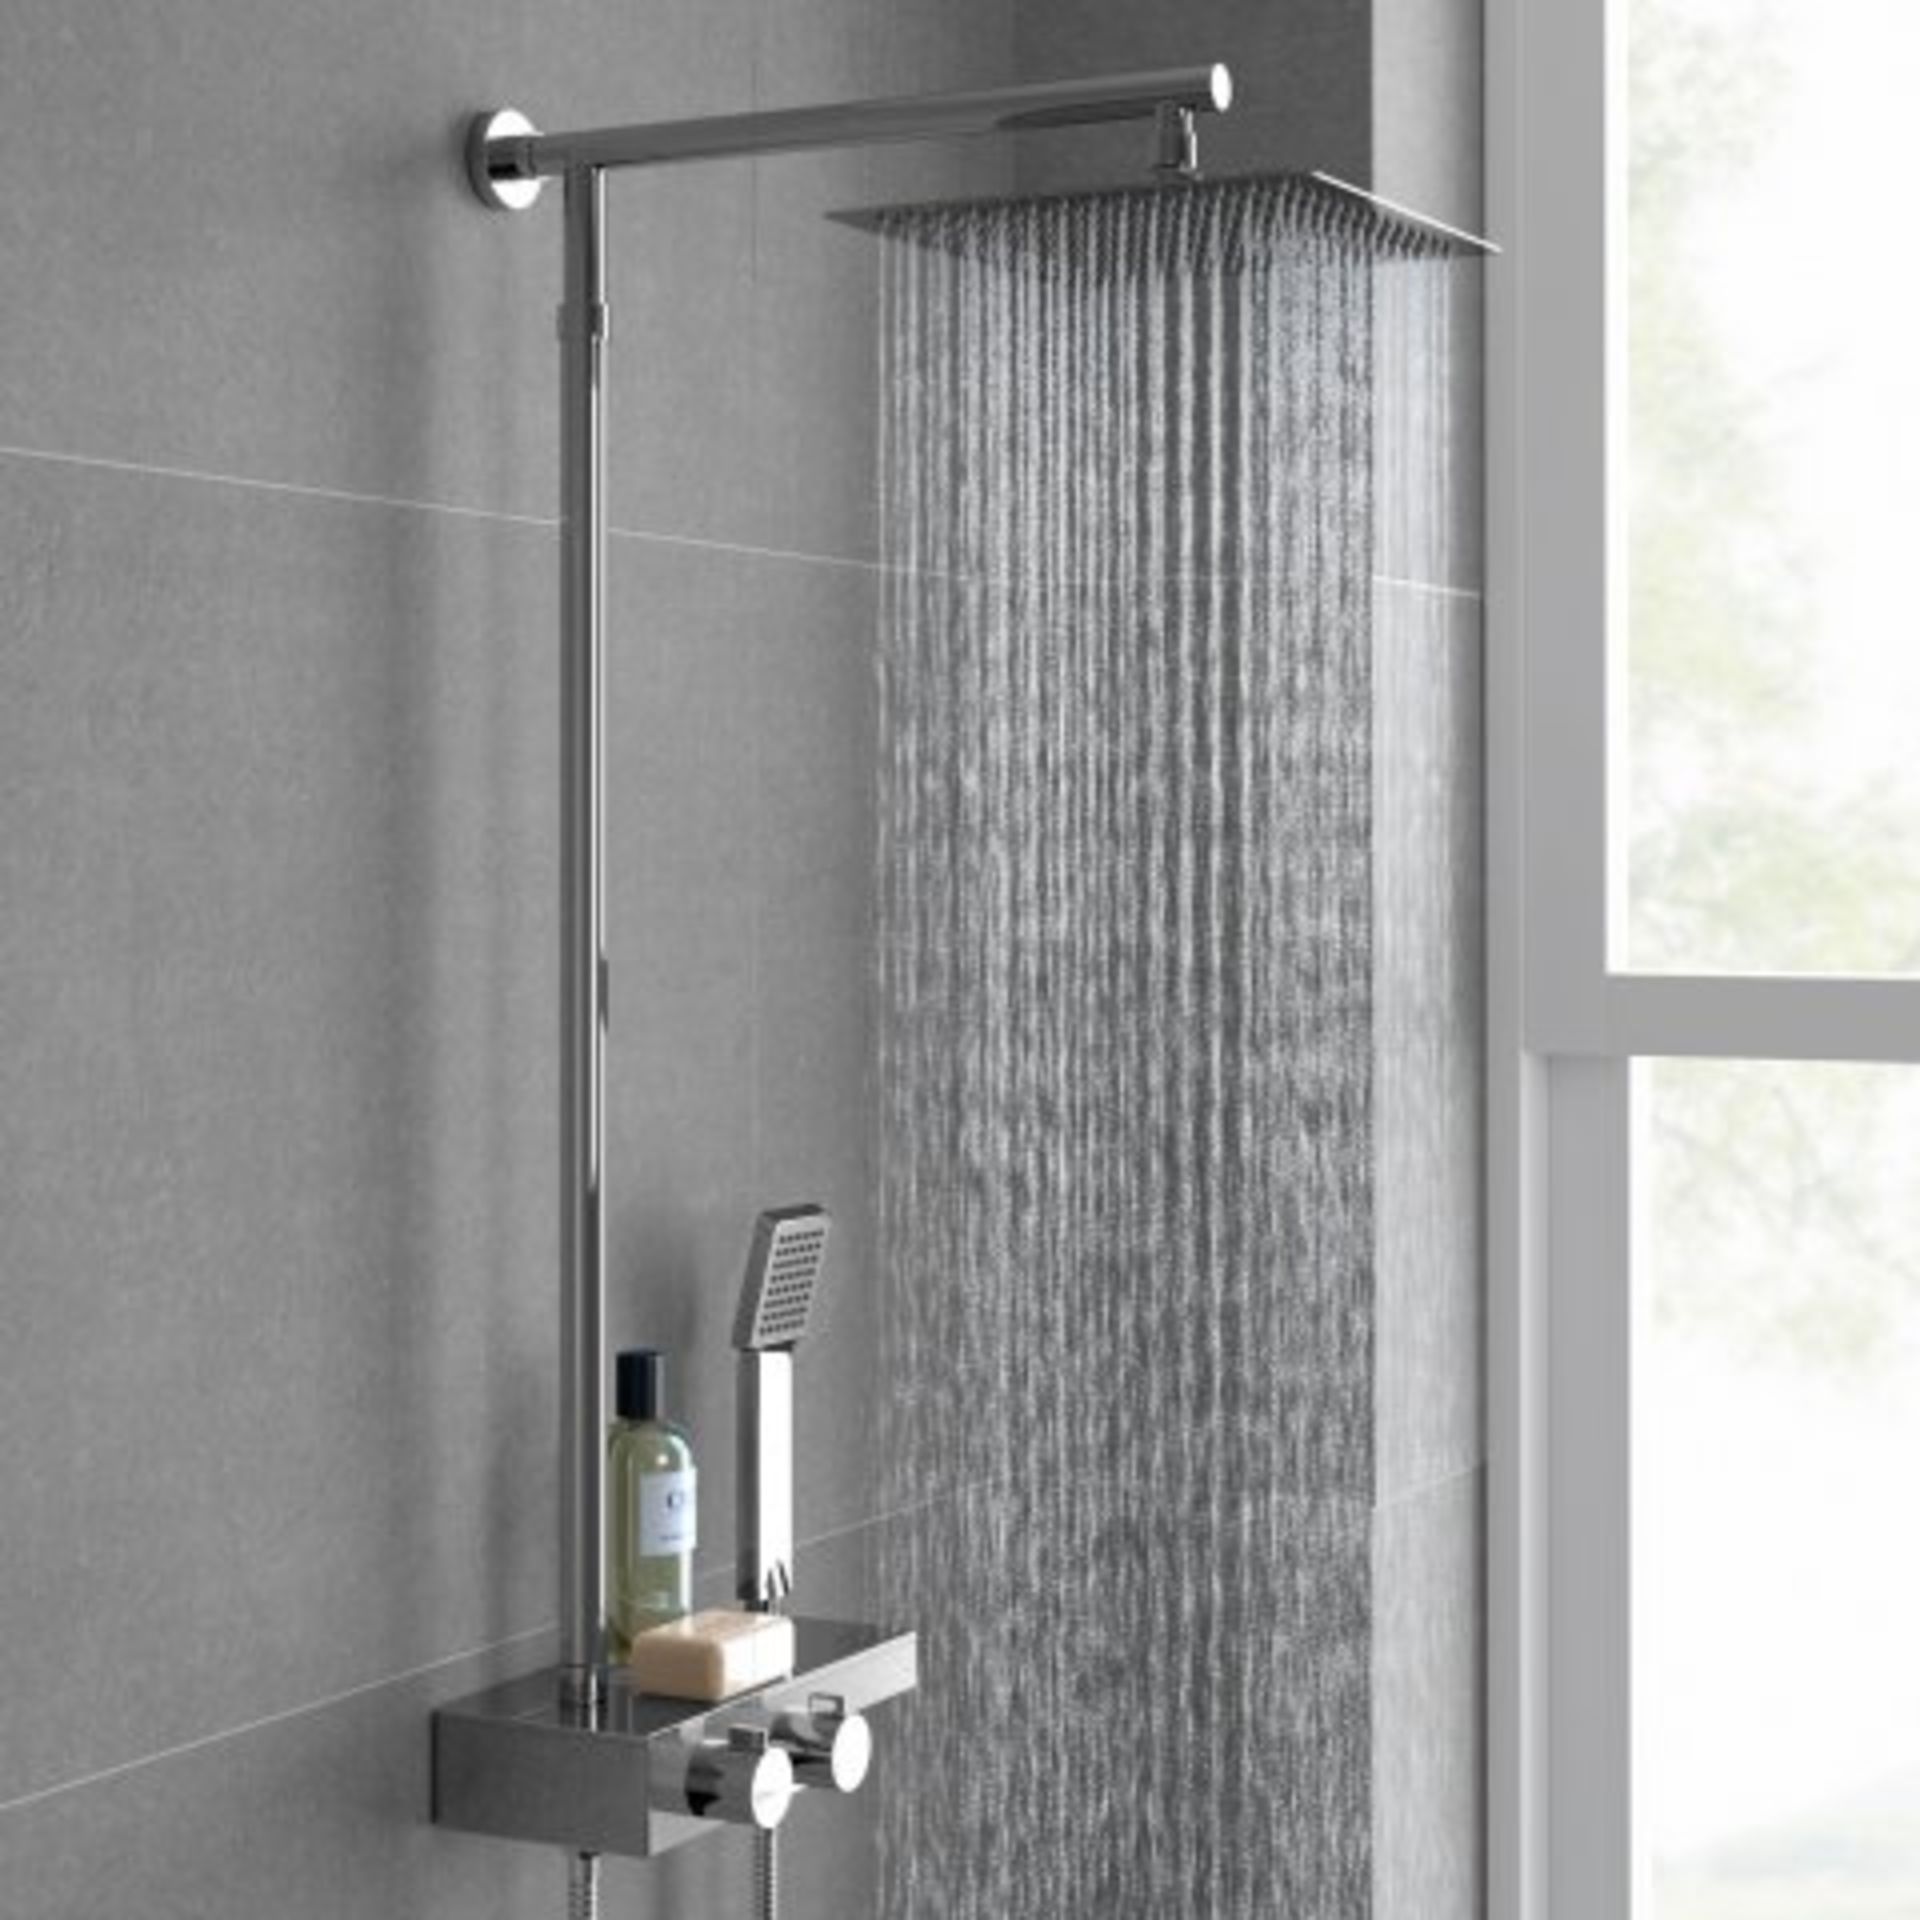 (P227) Thermostatic Exposed Shower Kit 250mm Square Head Handheld. RRP £349.99. Designer Style Our